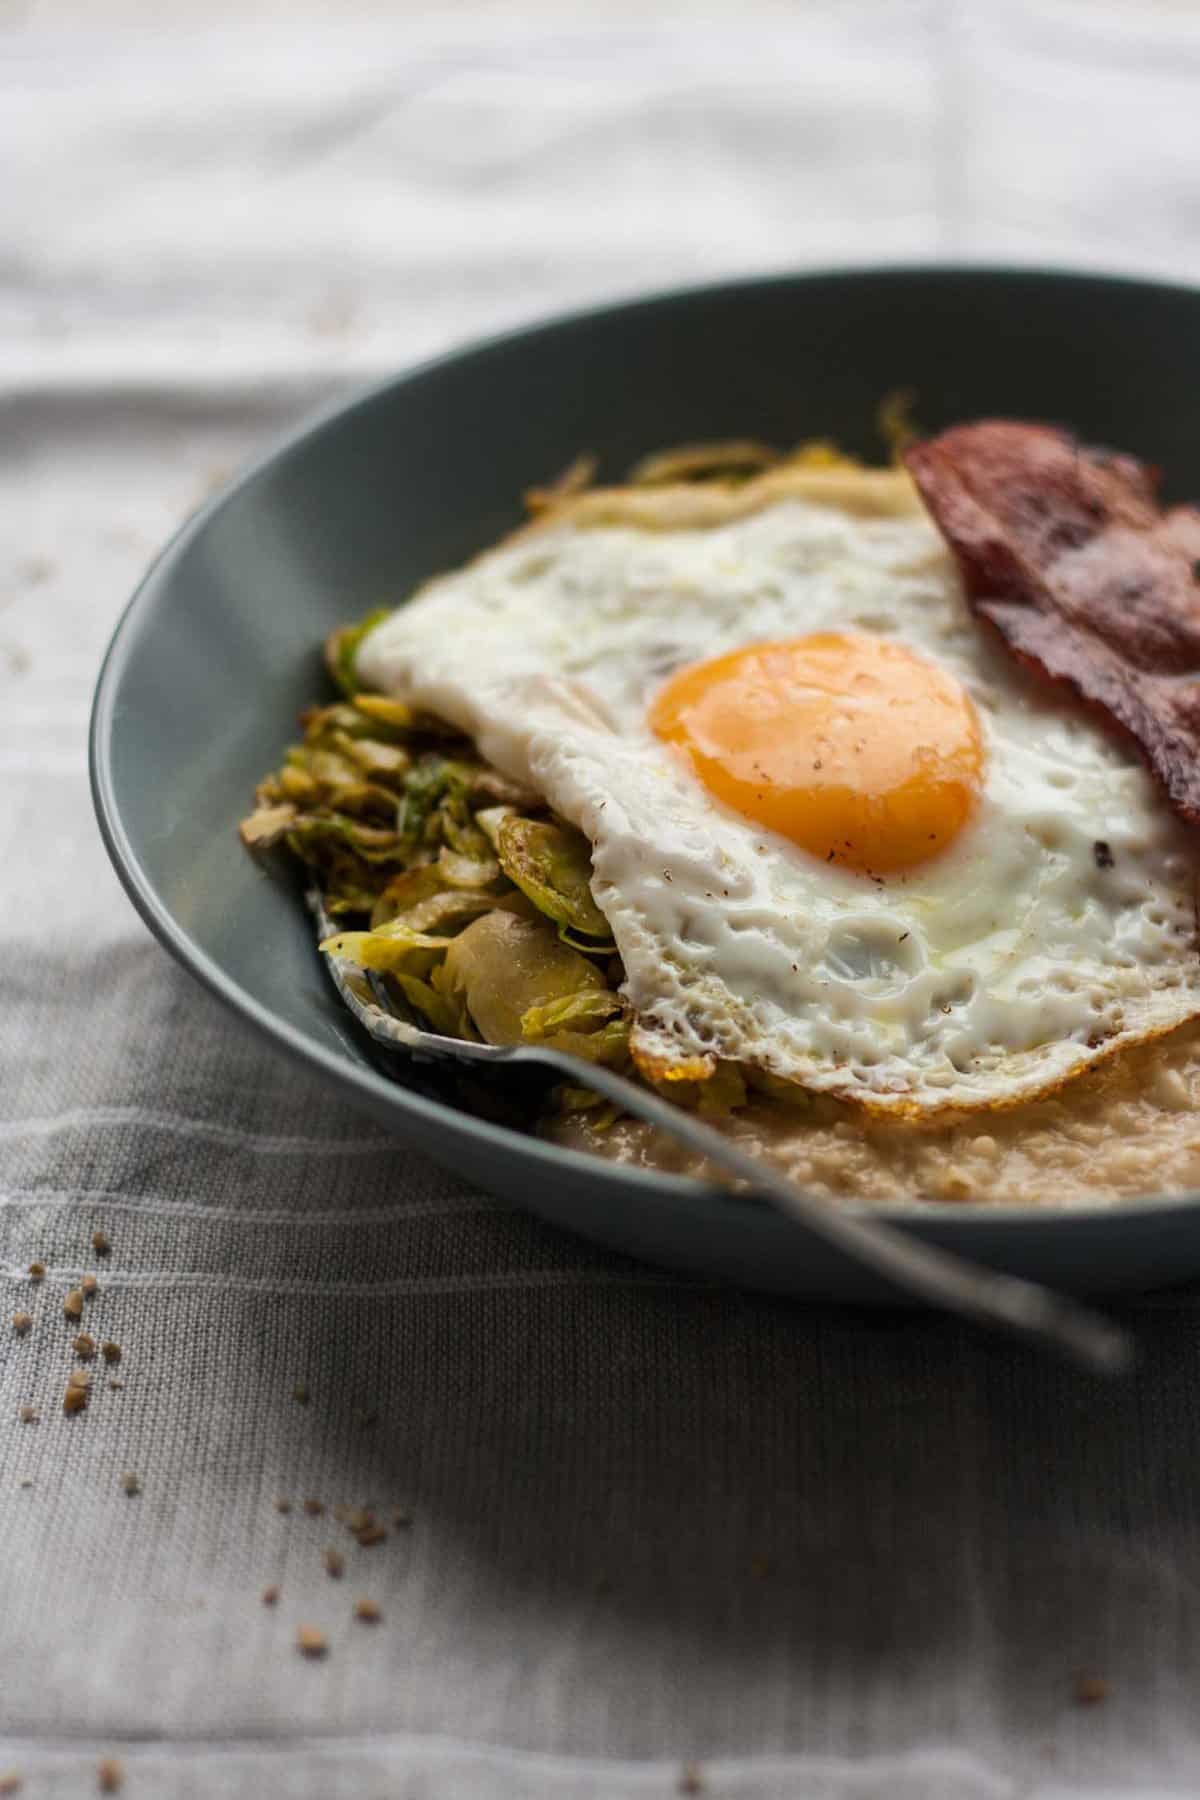 Savoury Porridge with Brussels Sprouts - this savoury oatmeal recipe is the perfect easy comfort food that is ready in less than half an hour! | eatloveeats.com